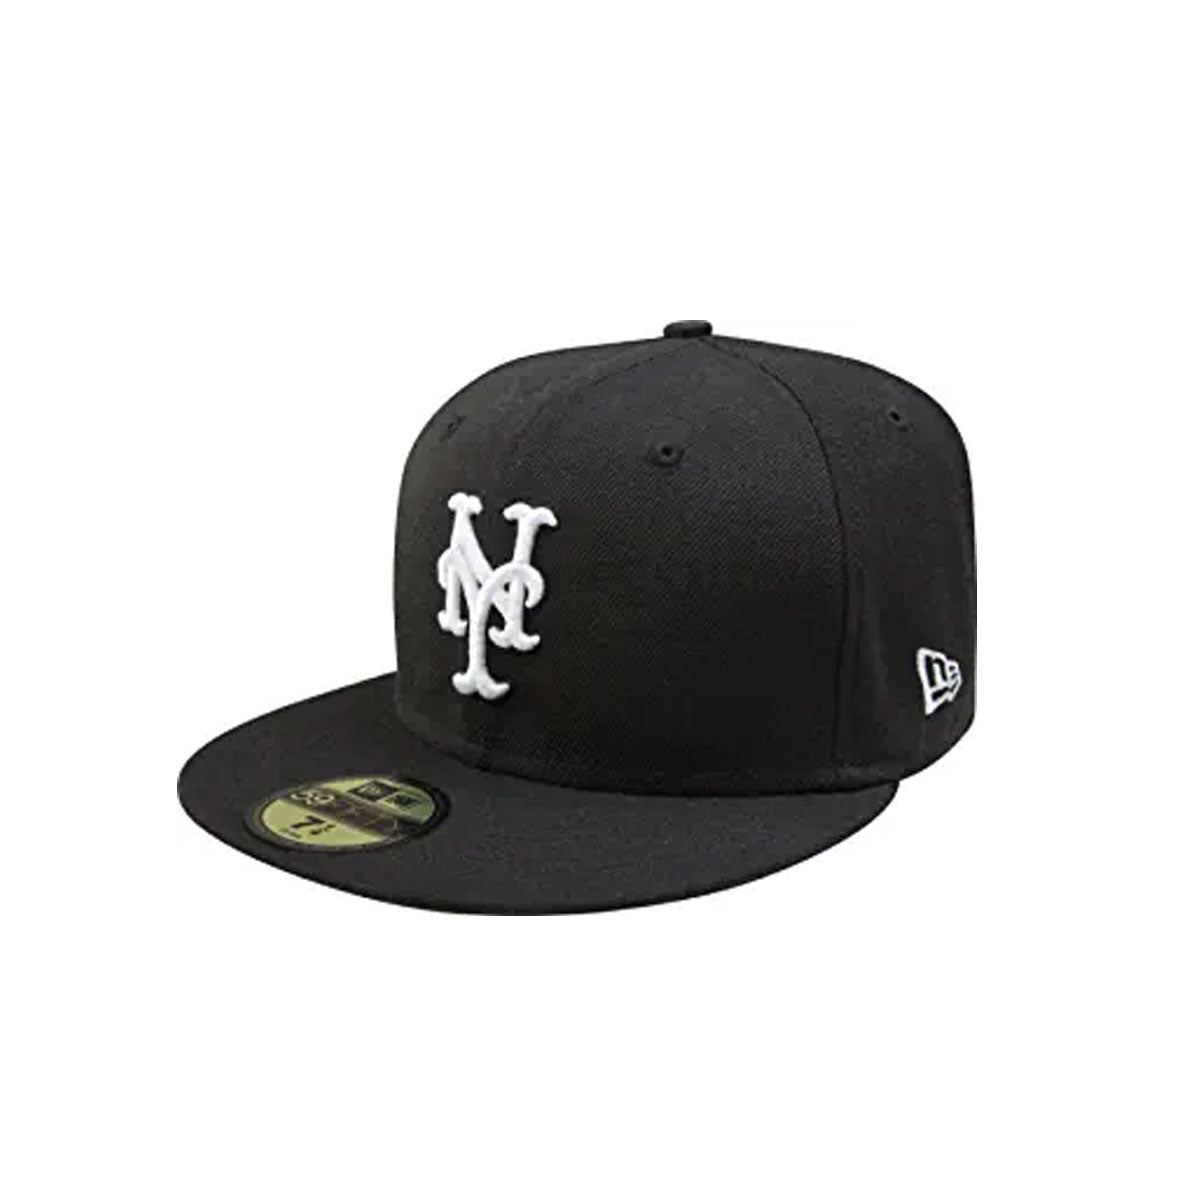 Mlb New York Mets Black With White 59Fifty Fitted Cap (Black, 7 1